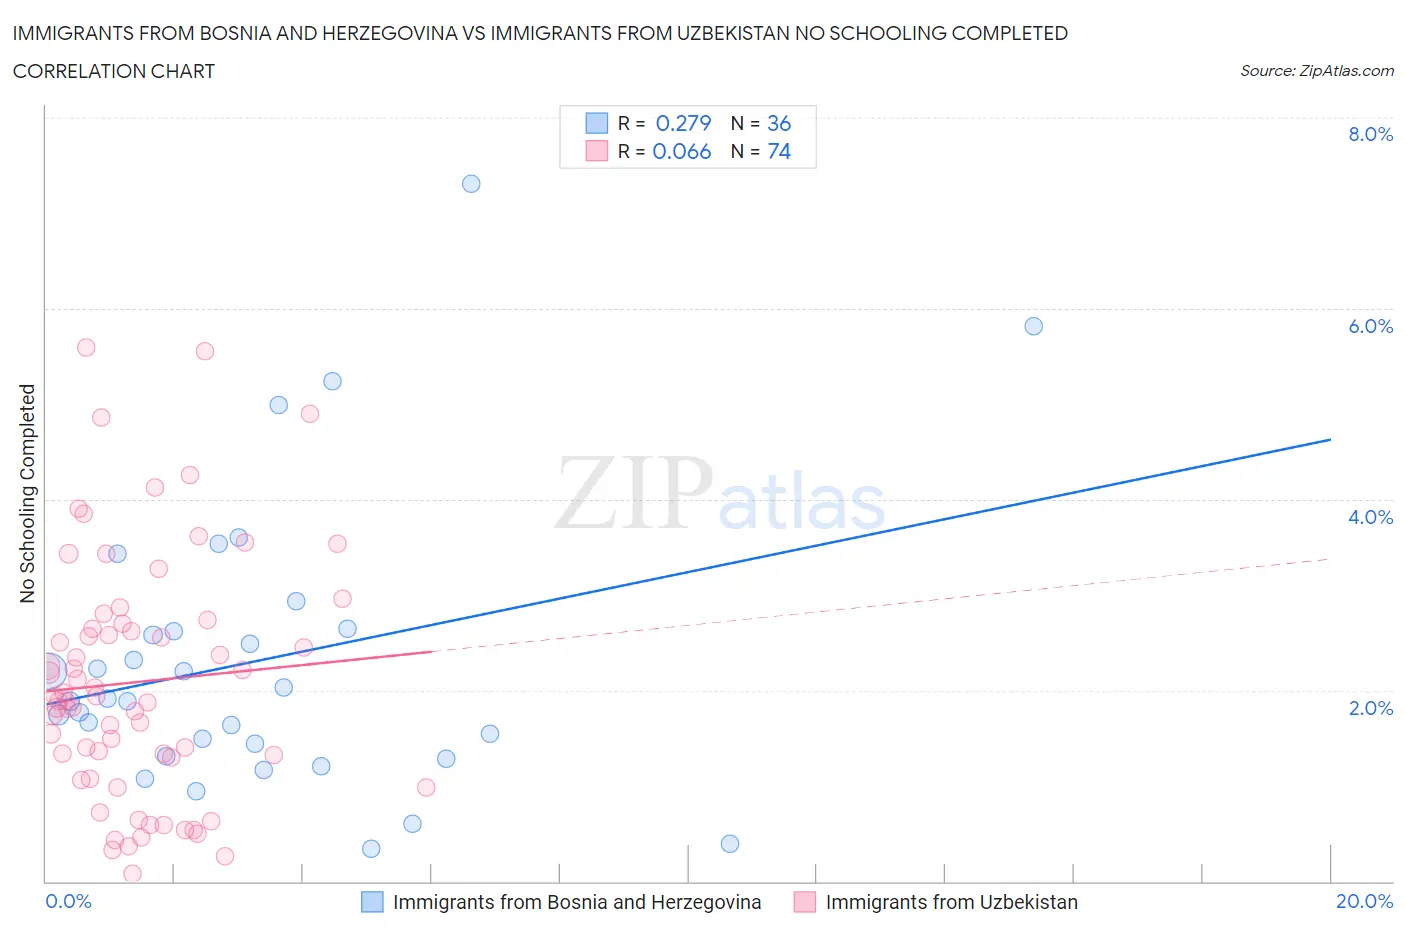 Immigrants from Bosnia and Herzegovina vs Immigrants from Uzbekistan No Schooling Completed